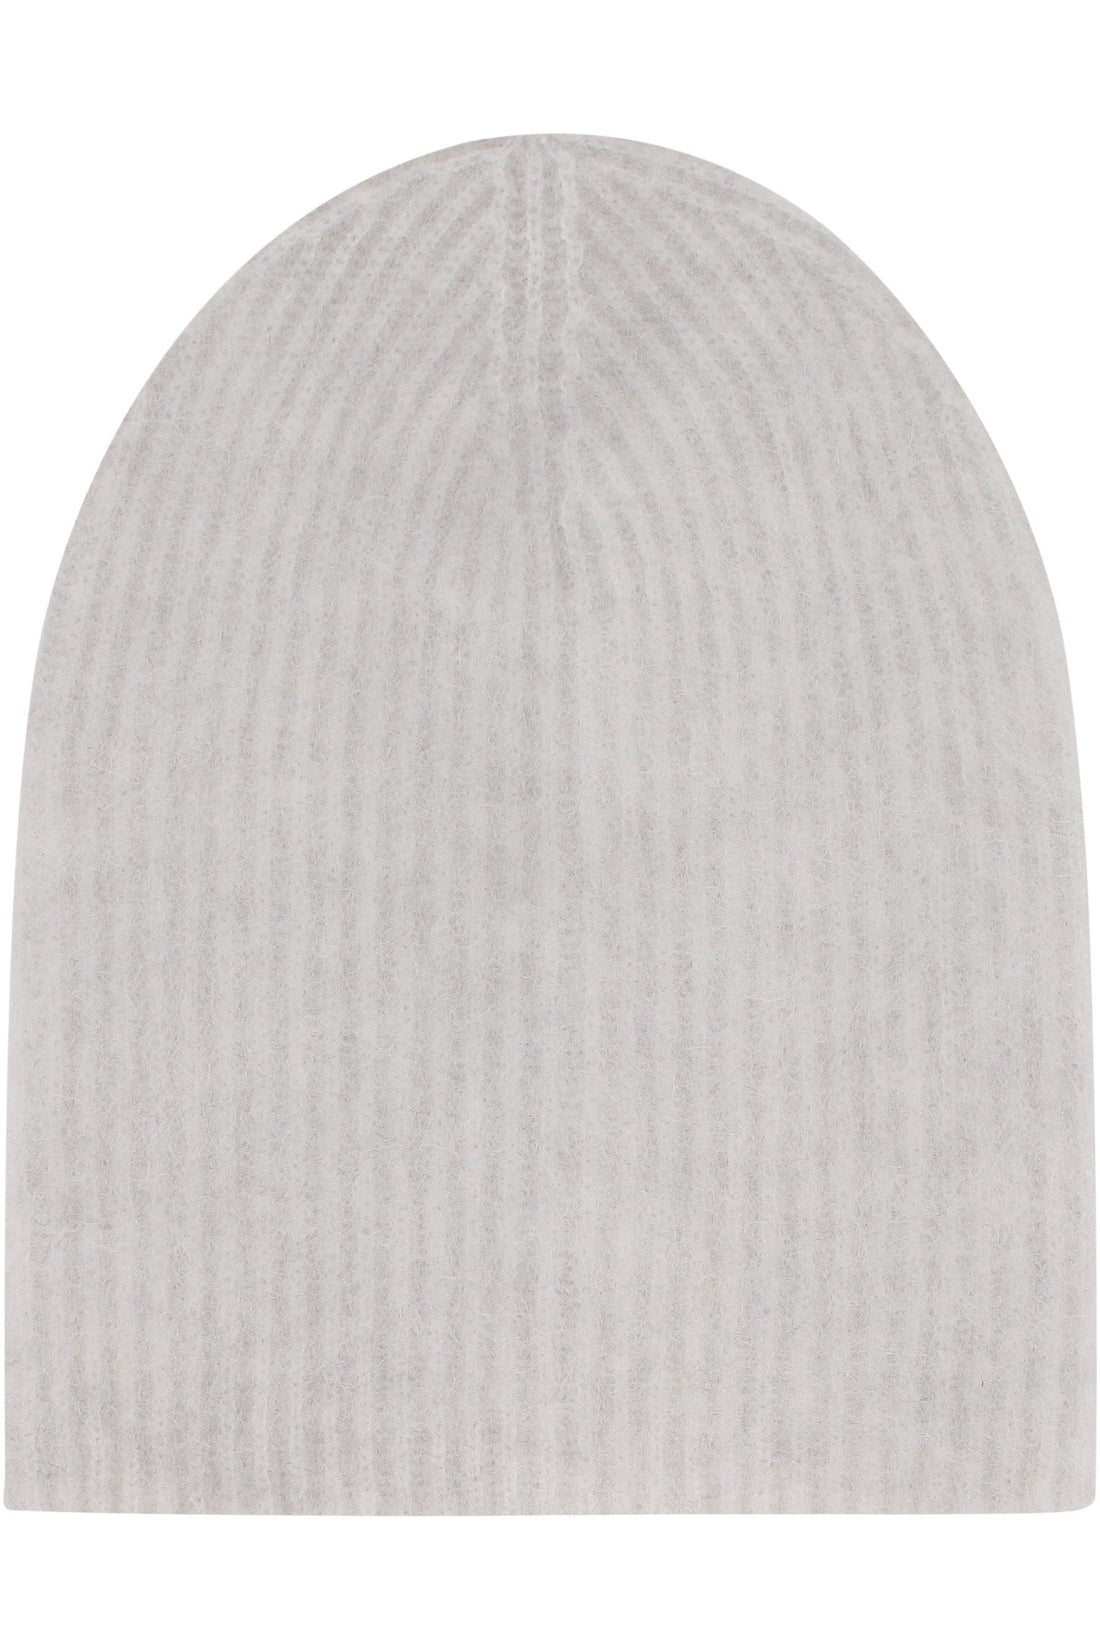 Roberto Collina-OUTLET-SALE-Knitted beanie-ARCHIVIST